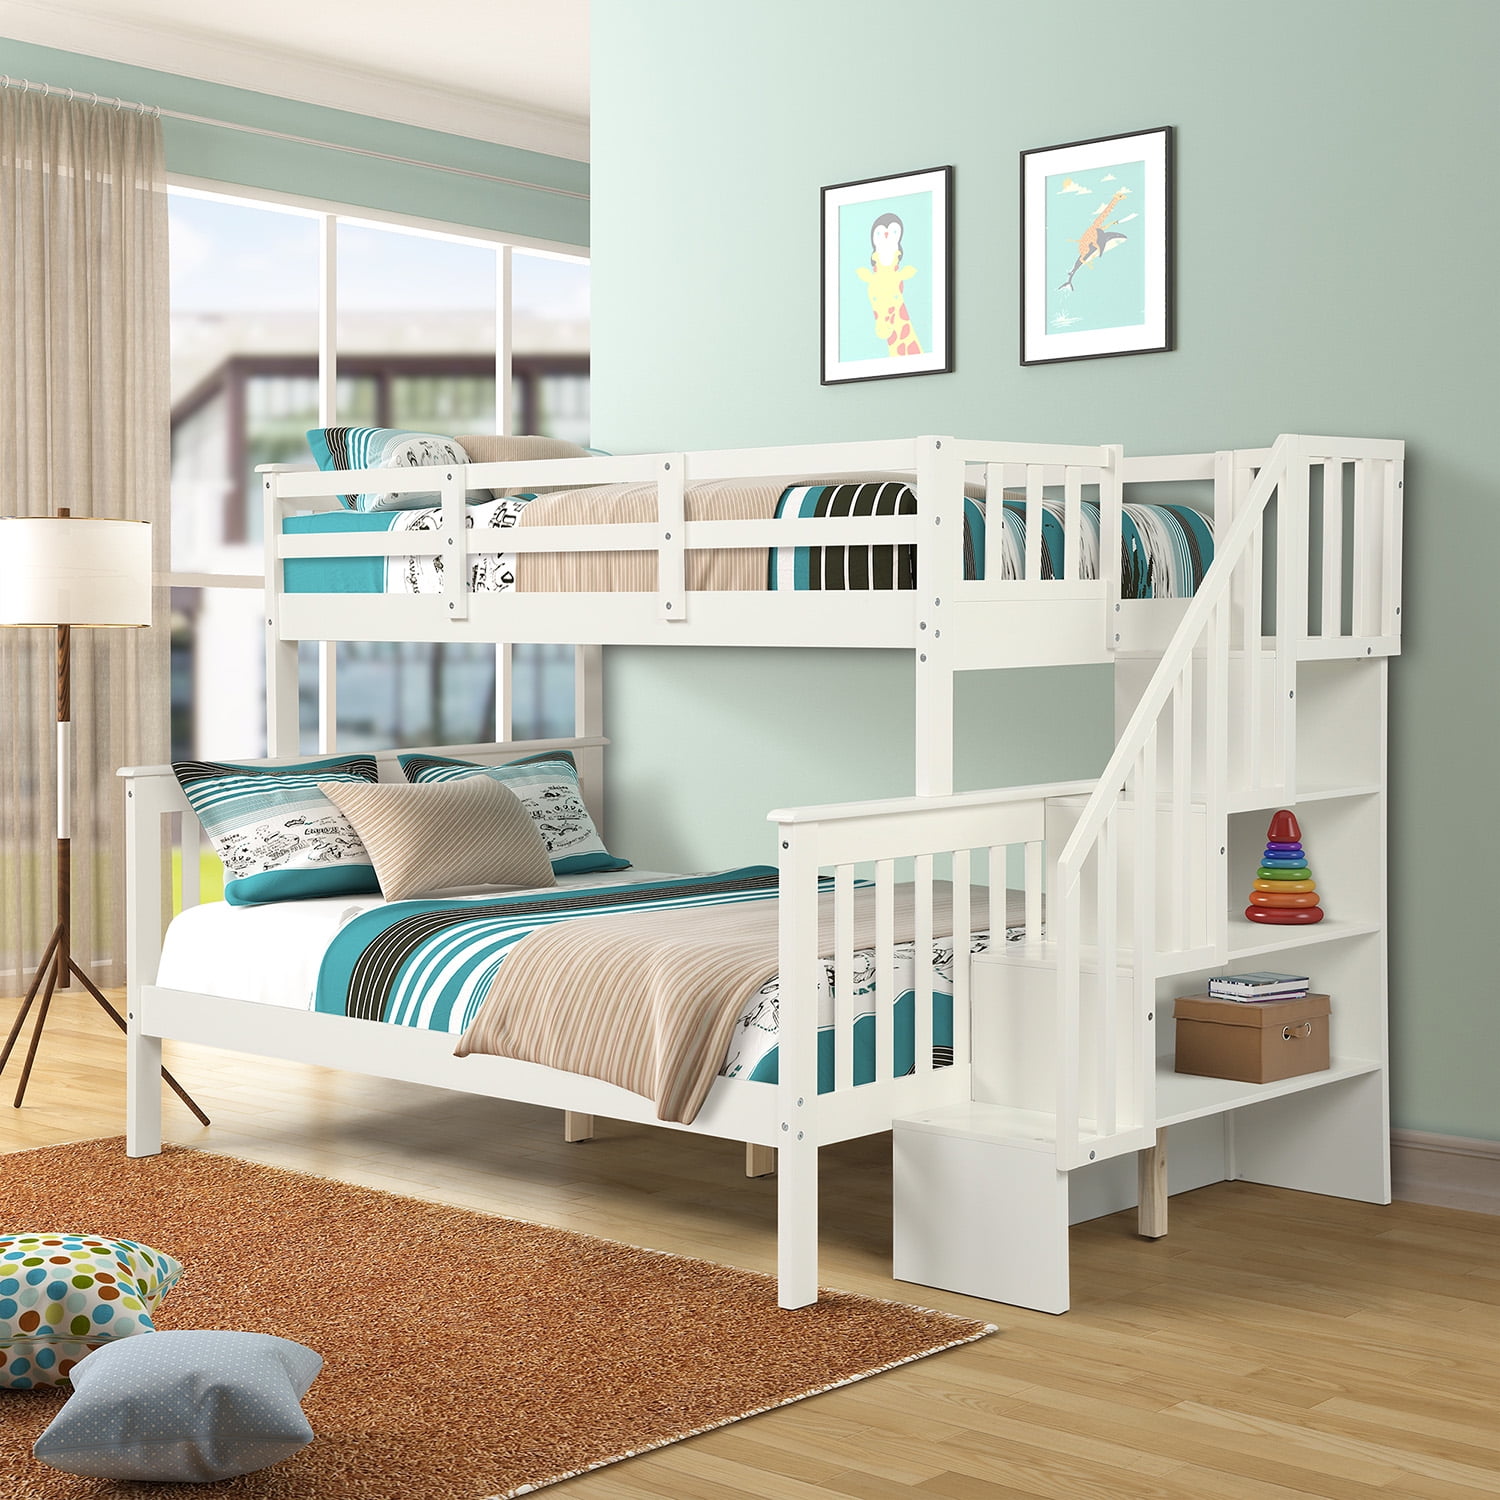 Stairway Bunk Bed Twin Over Full Size, Twin Over Full Size Bunk Beds